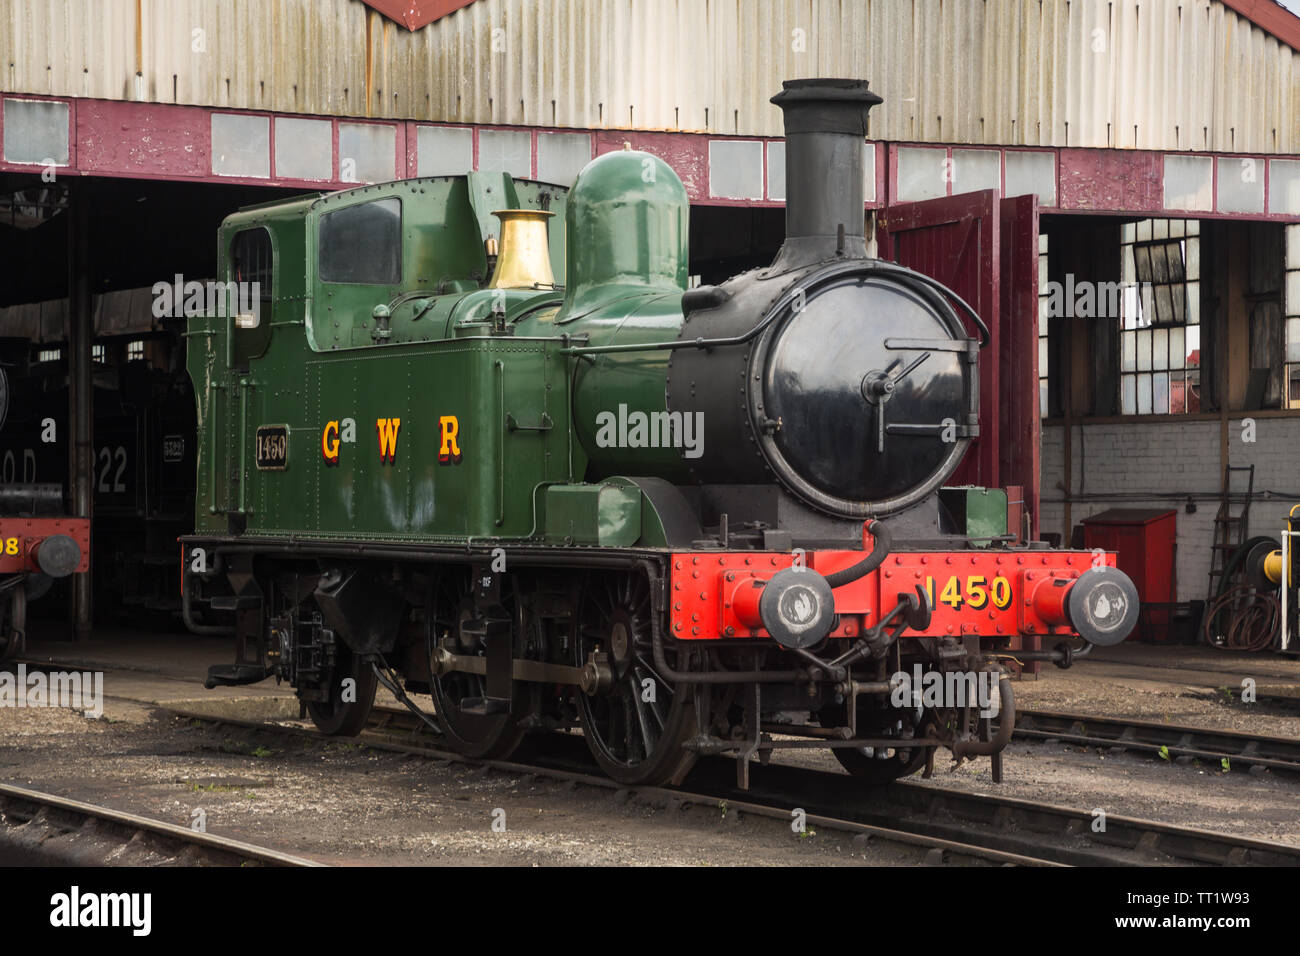 Green GWR 1450 steam railway locomotive engine (1400 class 0-4-2T built 1935 at Swindon Works) stationary by shed, Didcot Railway Centre, Oxfordshire. Stock Photo